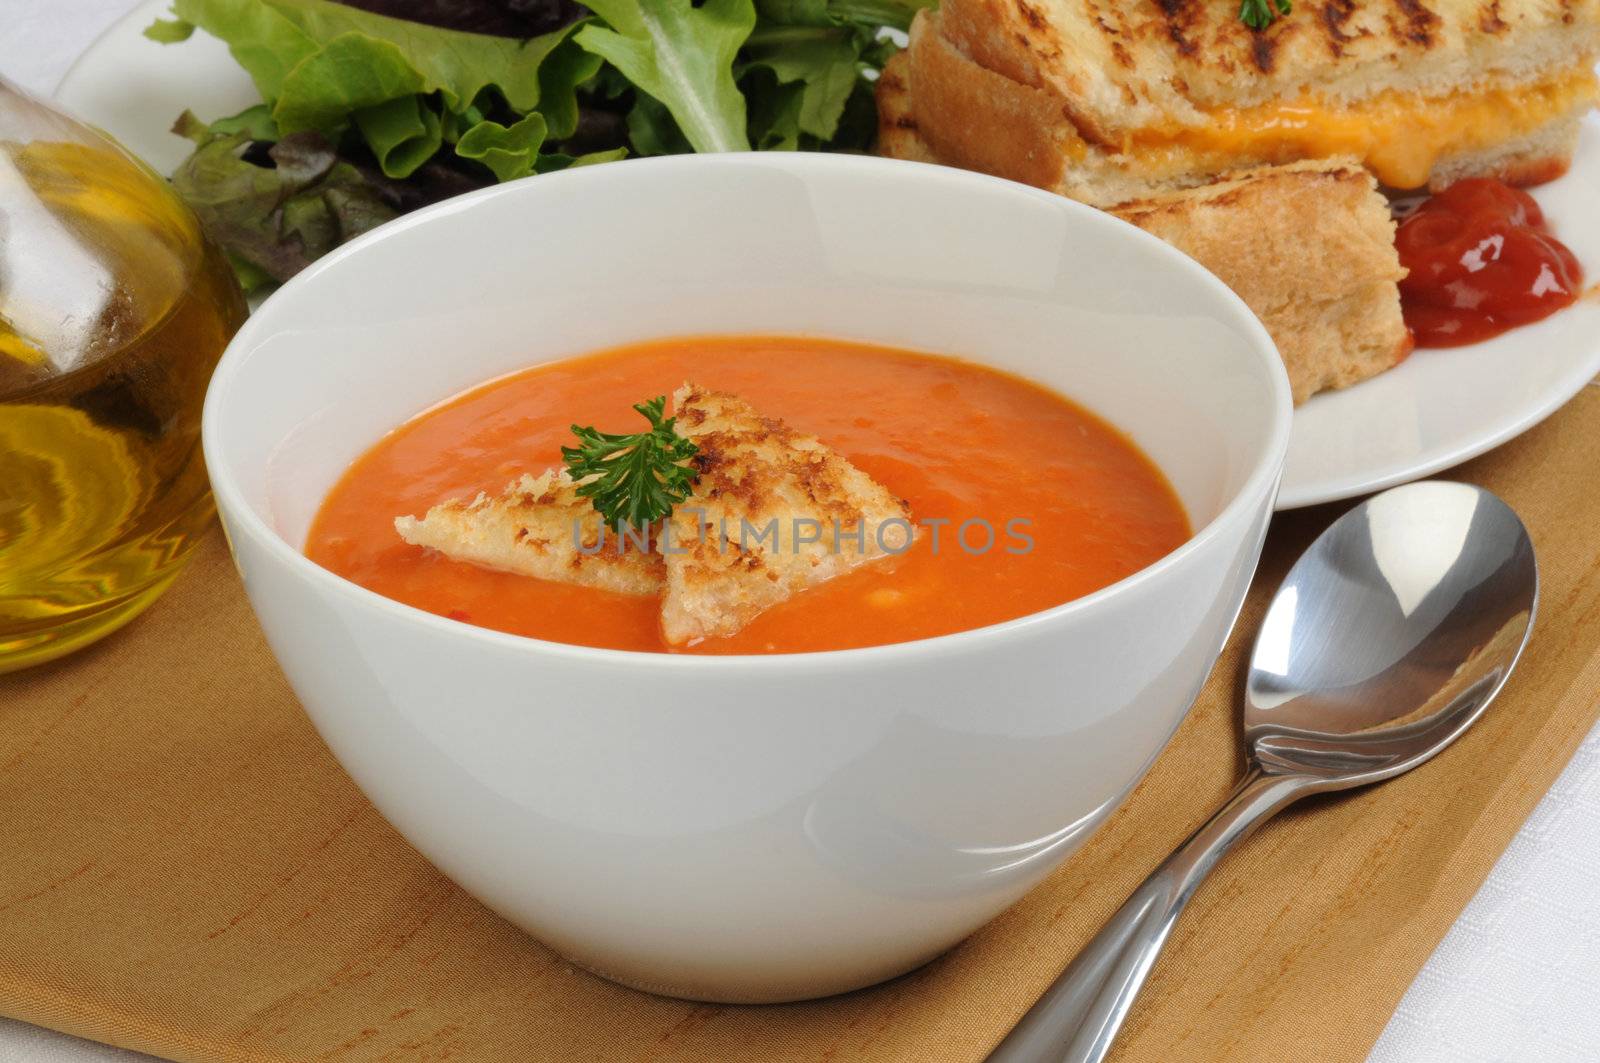 Delicious homemade bowl of red pepper soup.